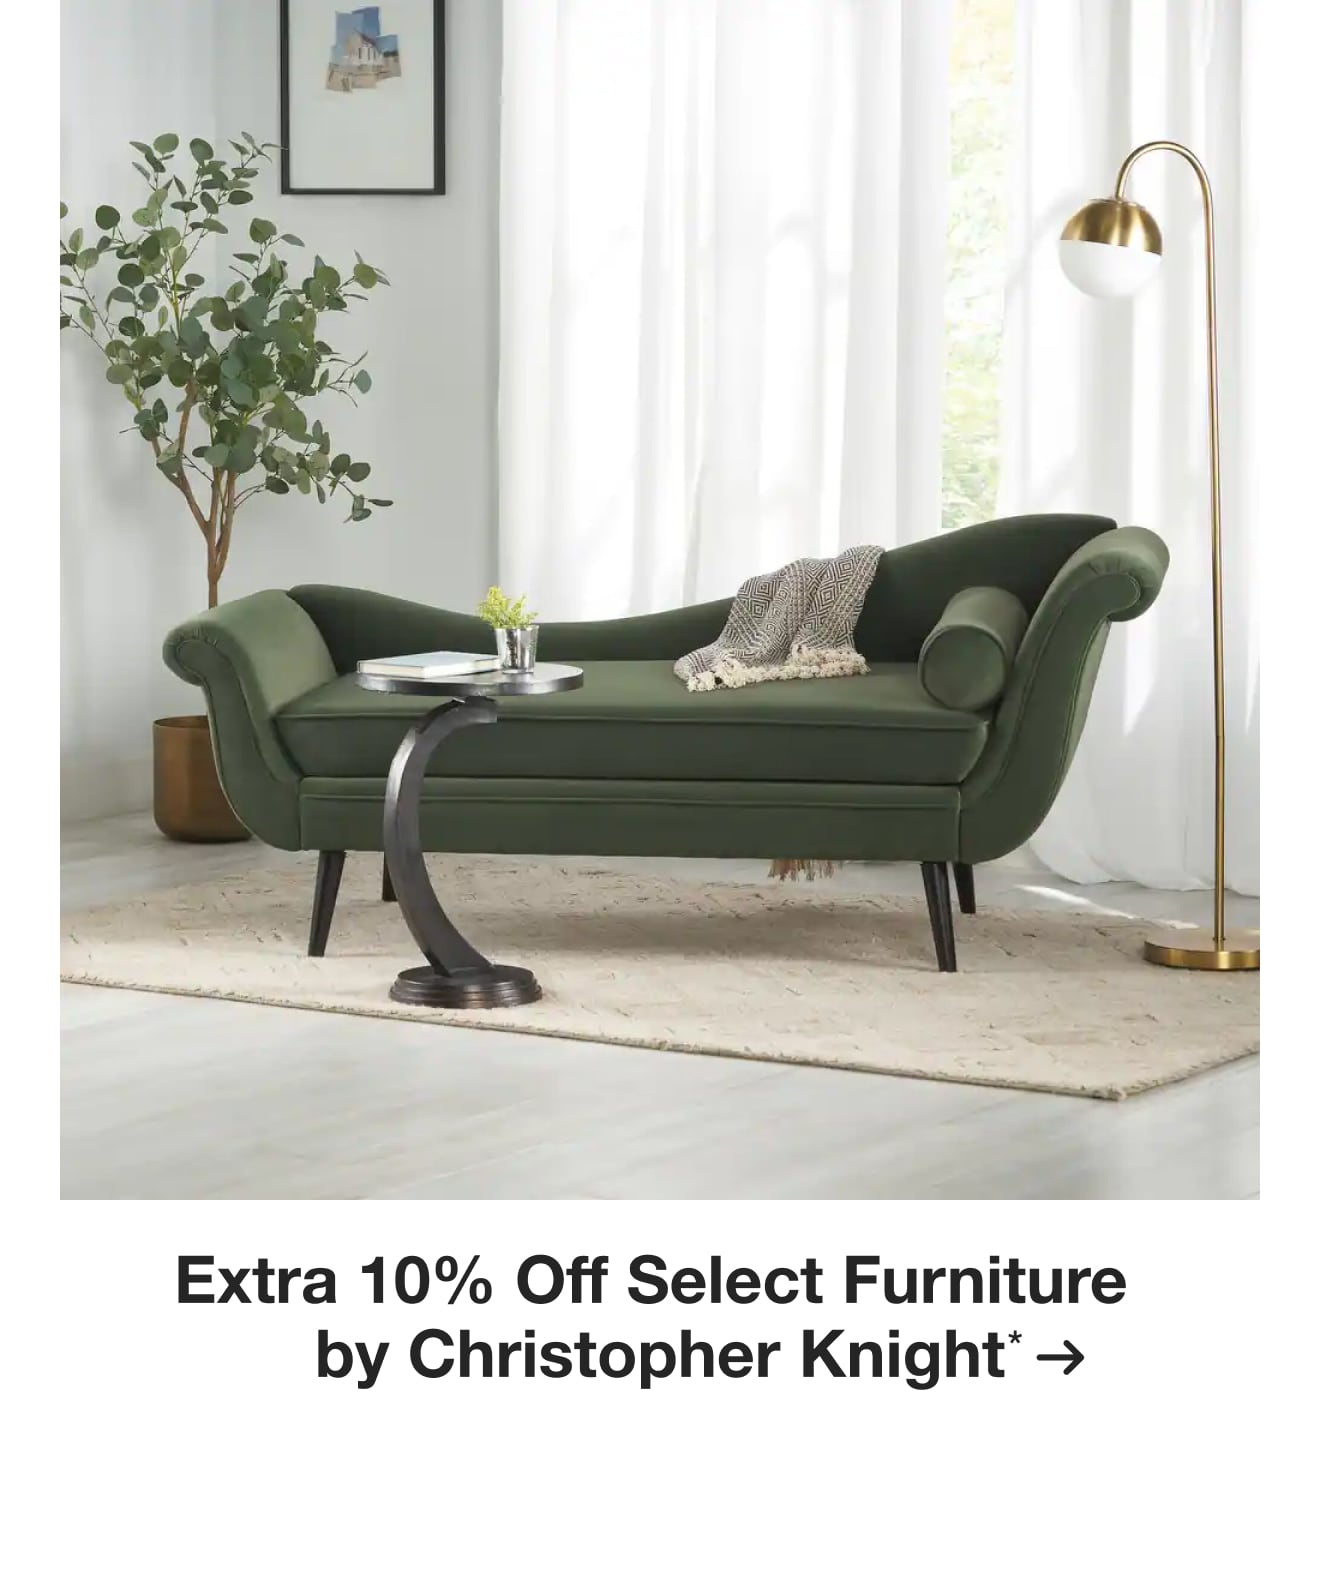 Extra 10% off Select Furniture by Christopher Knight*